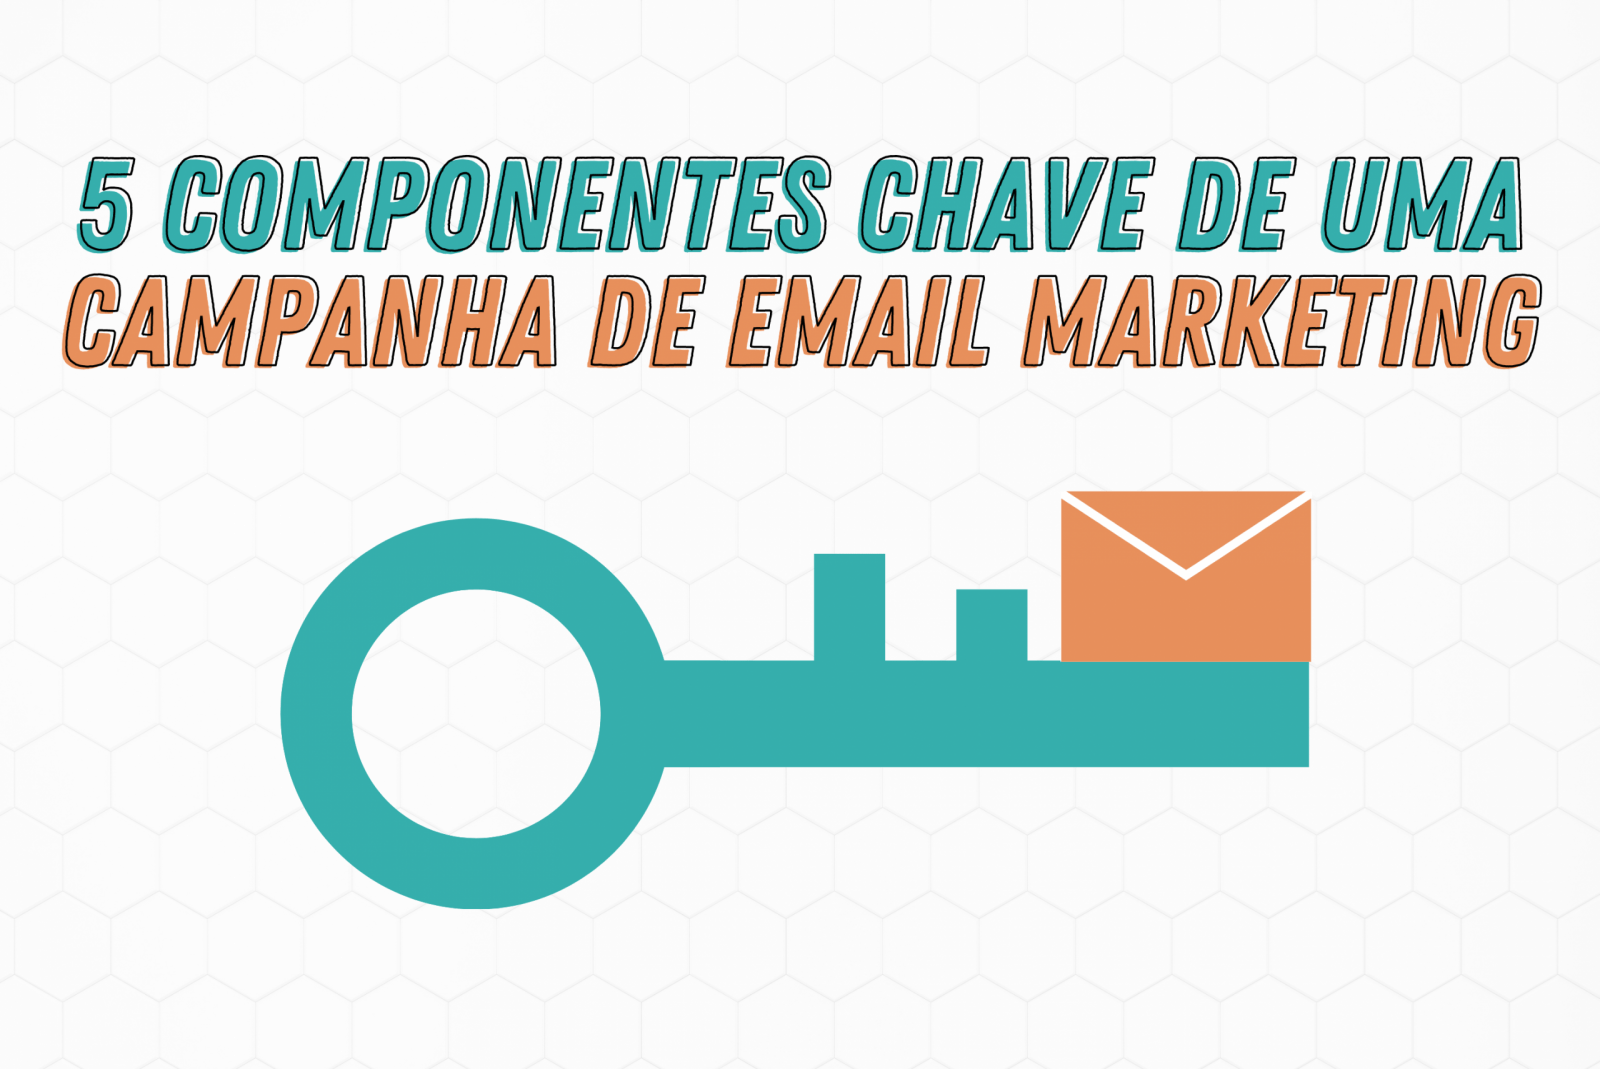 EMAIL MARKETING 40